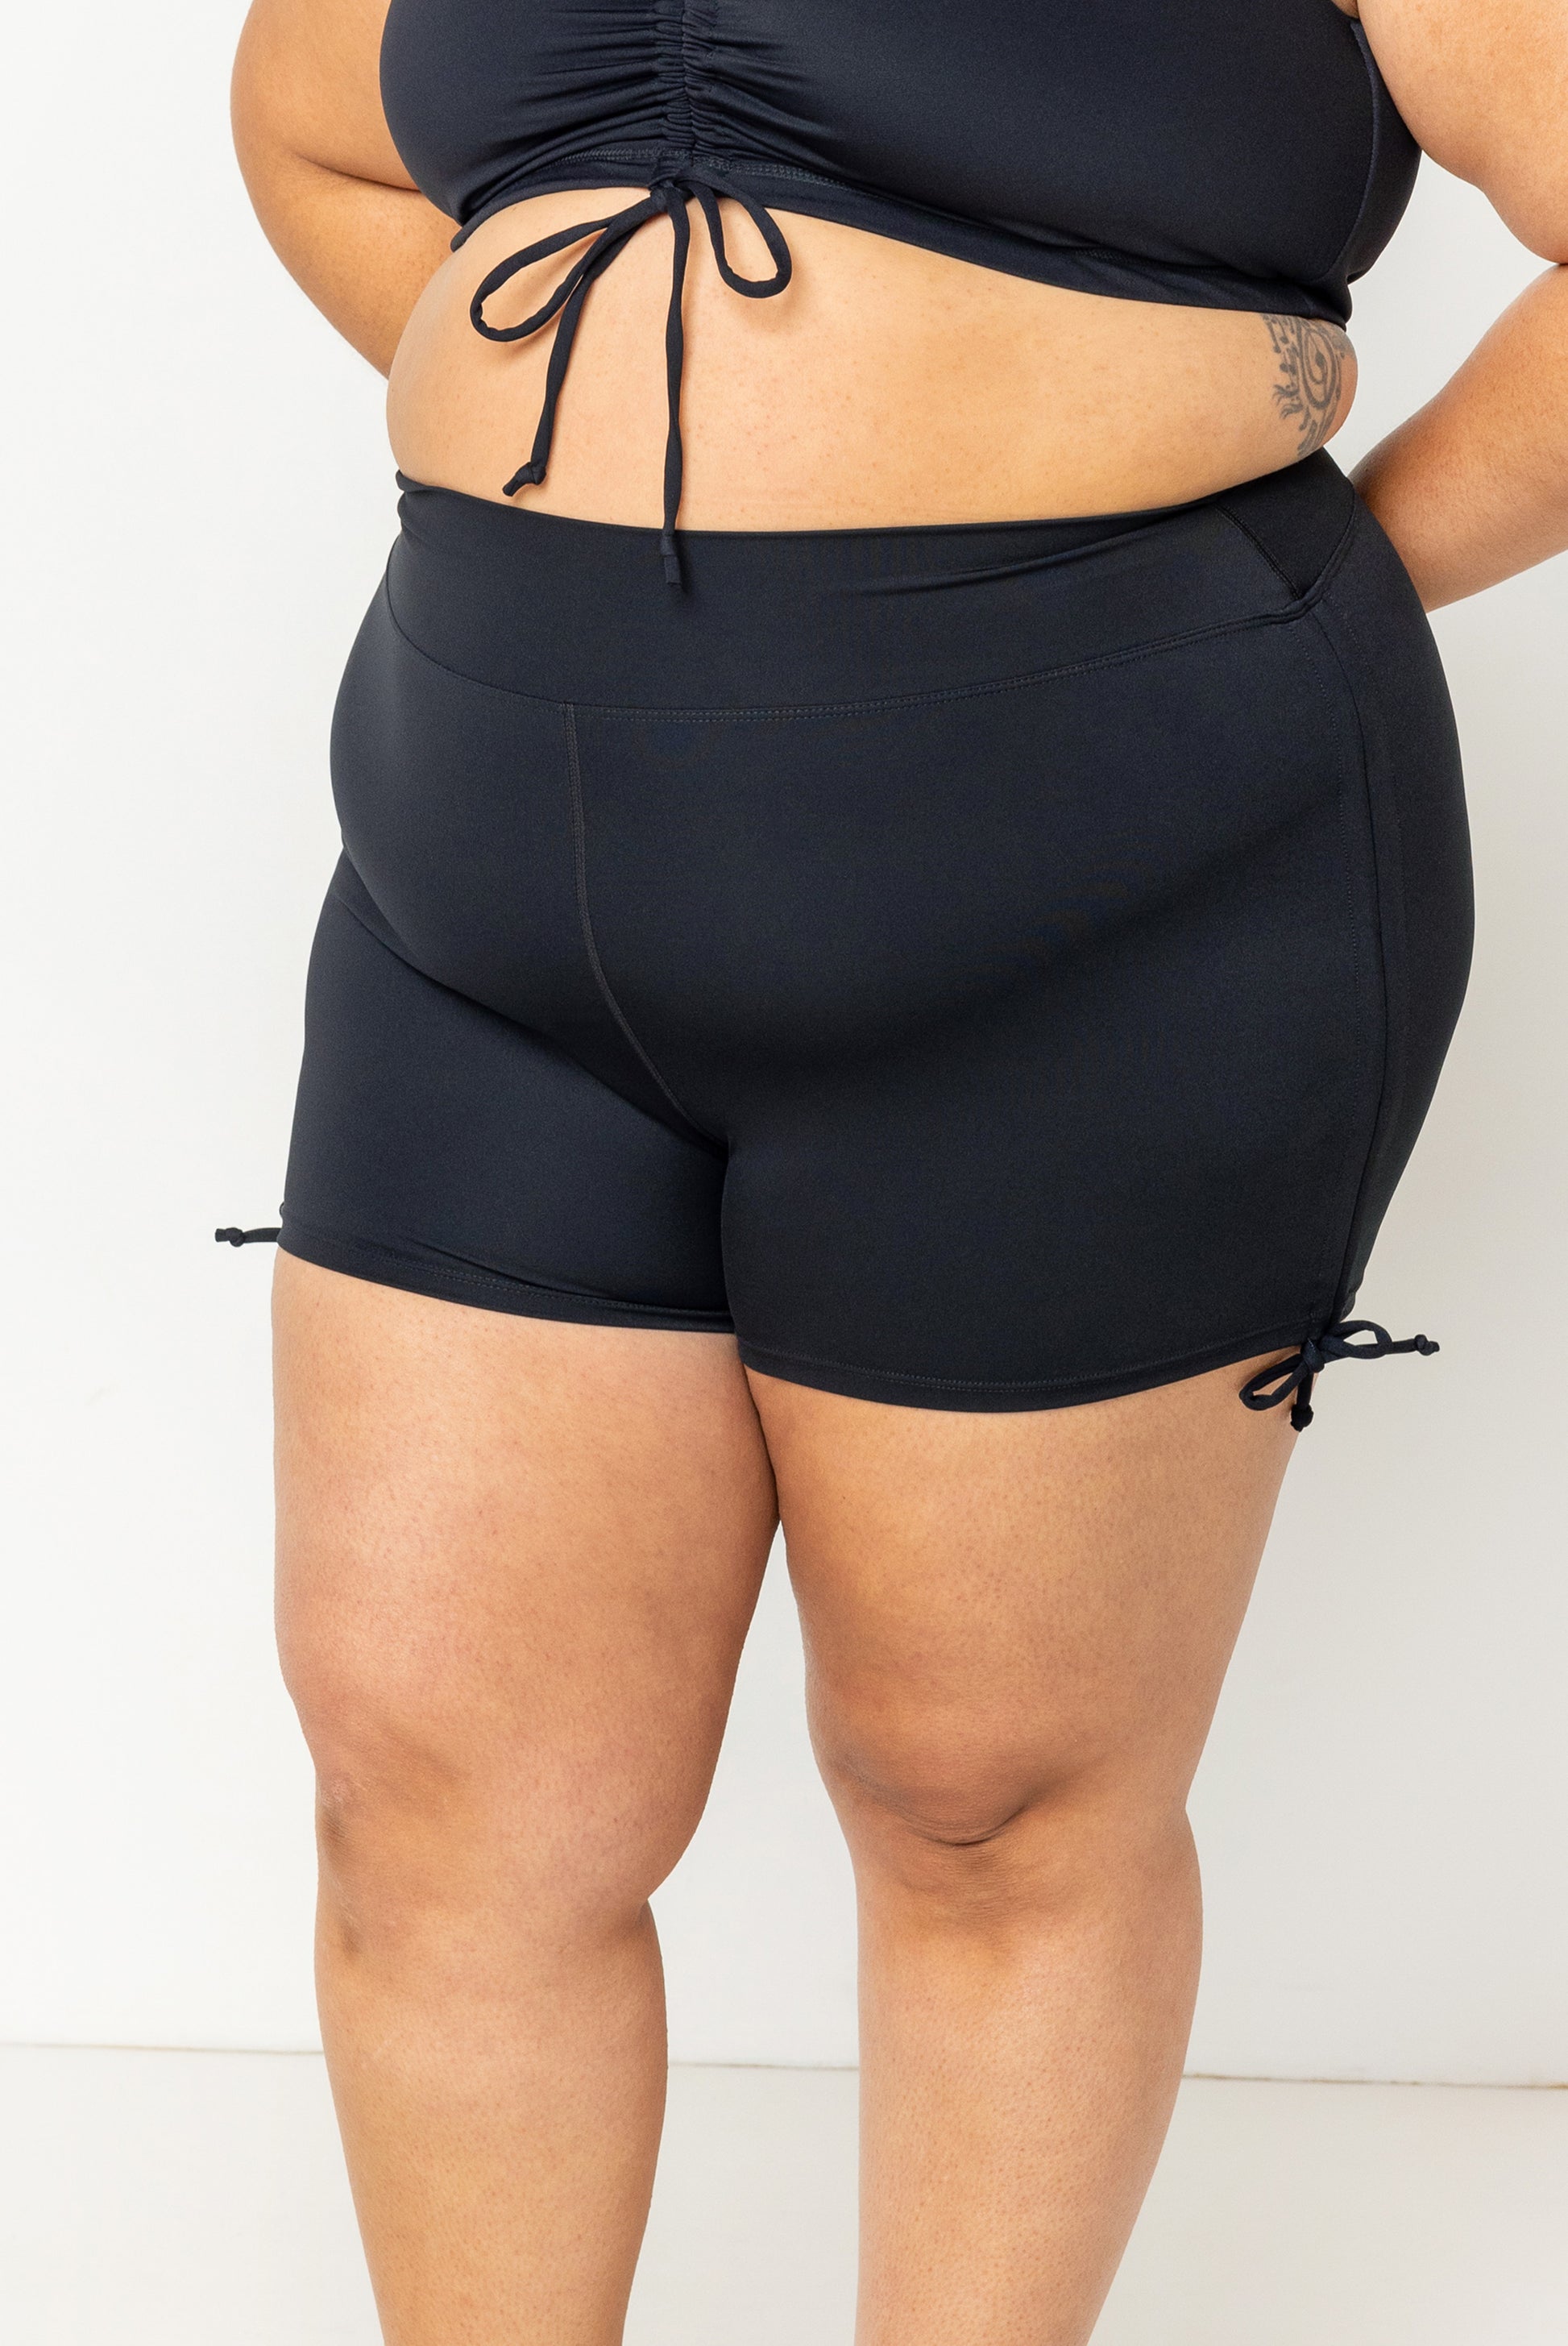 Closeup of size 2X swim plus size booty shorts with adjustable sides un-cinched. 